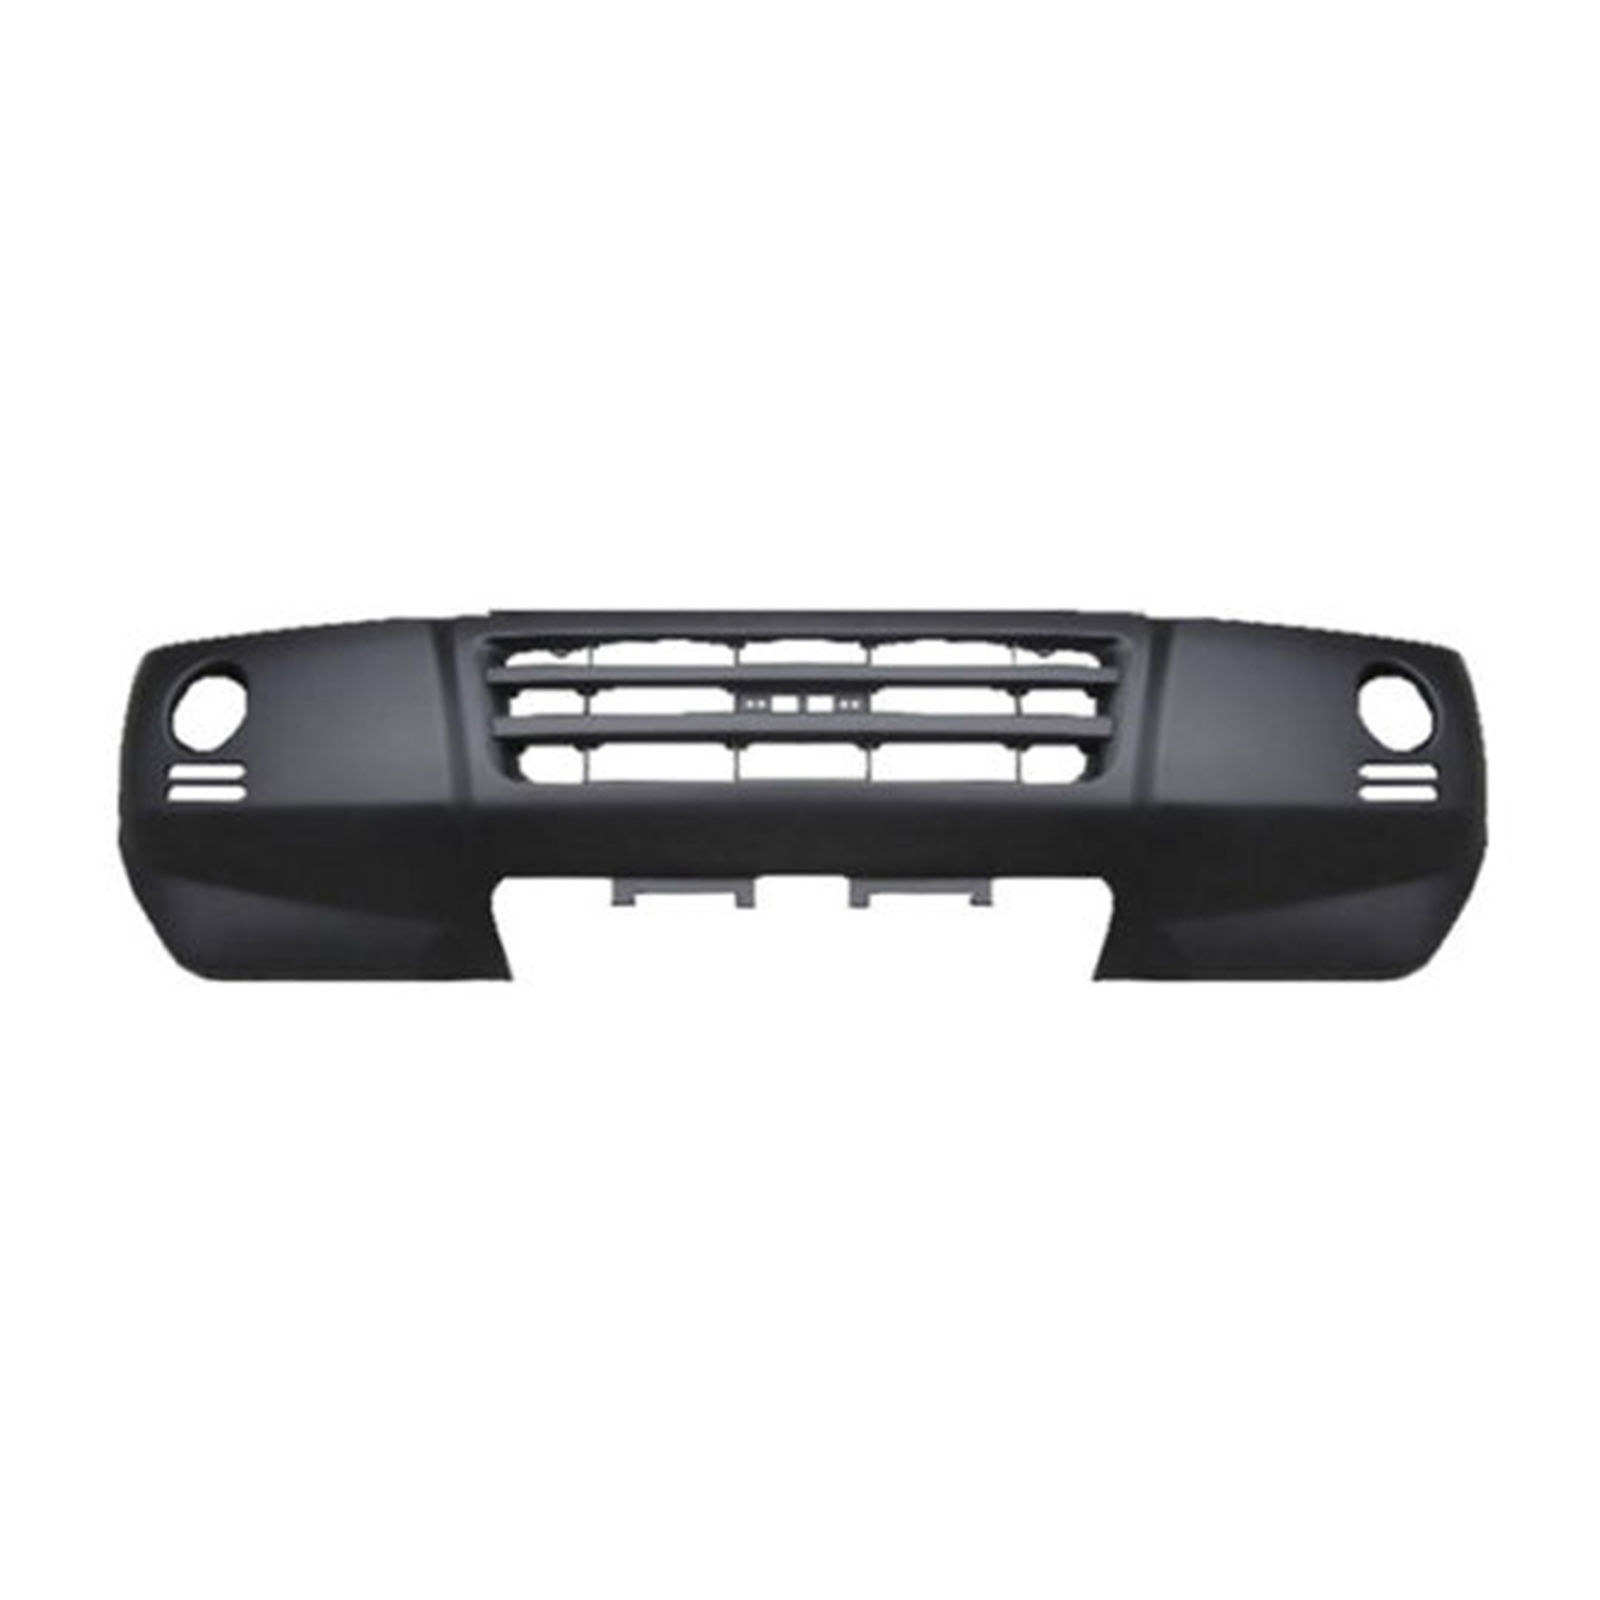 2003-2006 MITSUBISHI MONTERO Front Bumper Cover Painted to Match